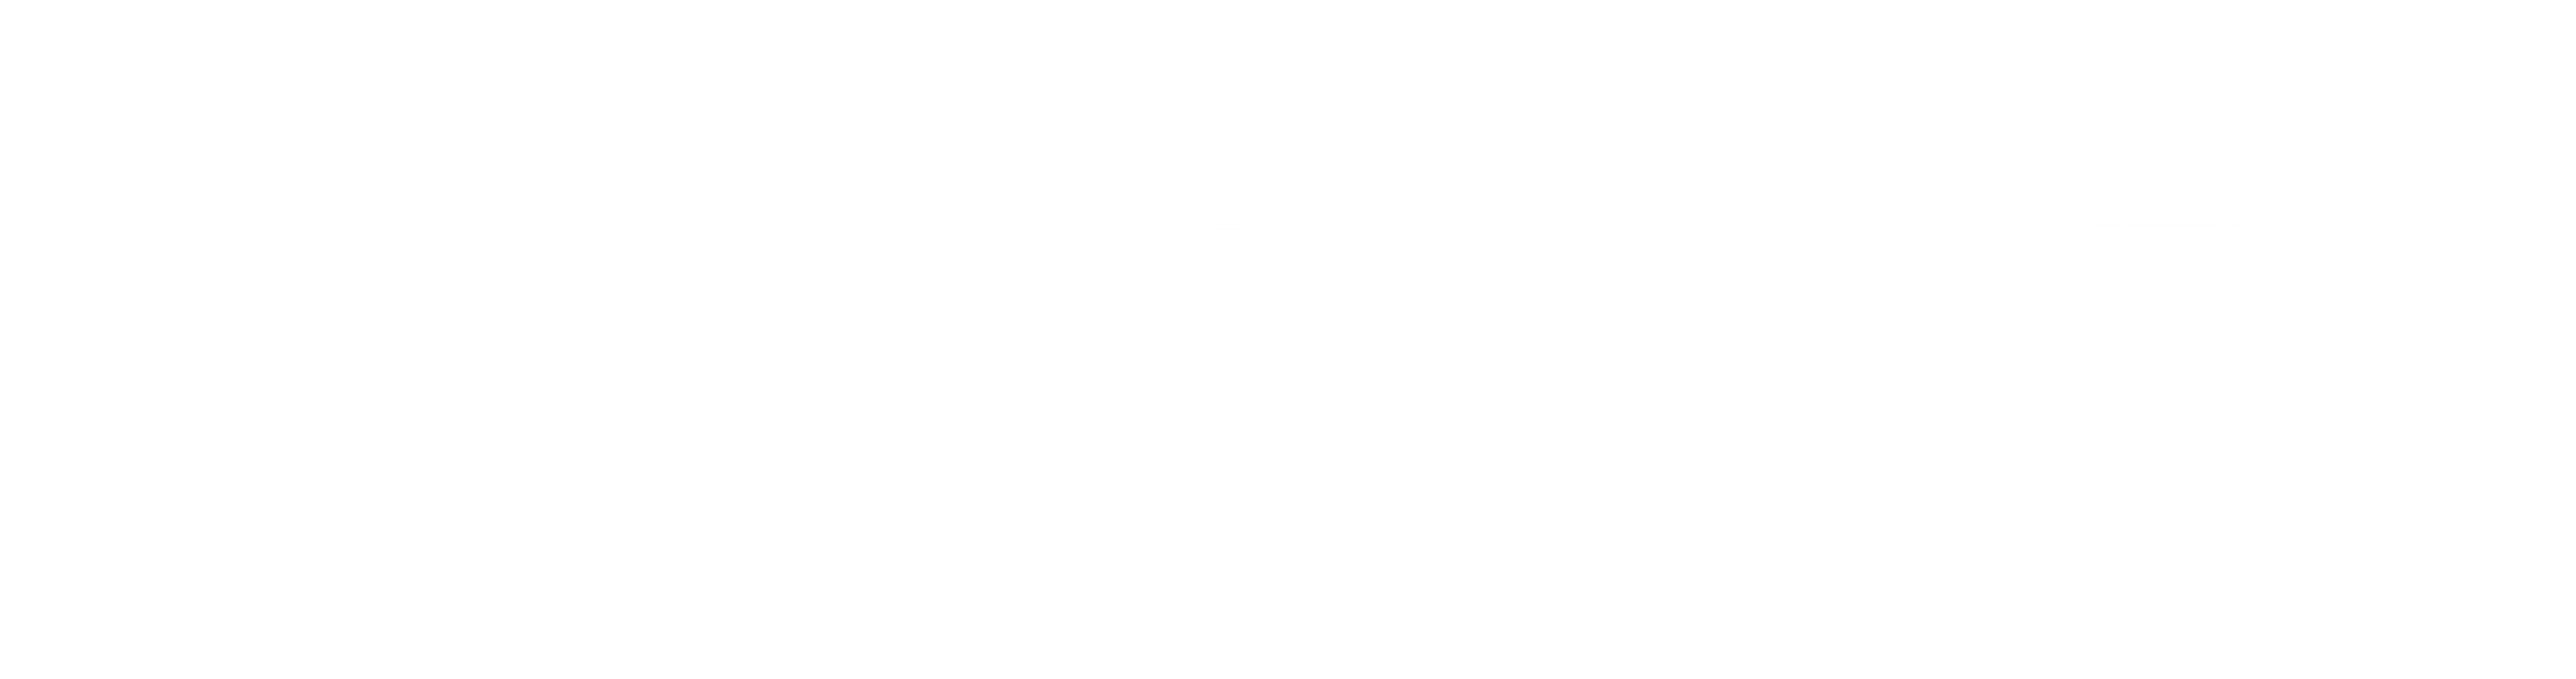 Chrétiens TV white faded logo